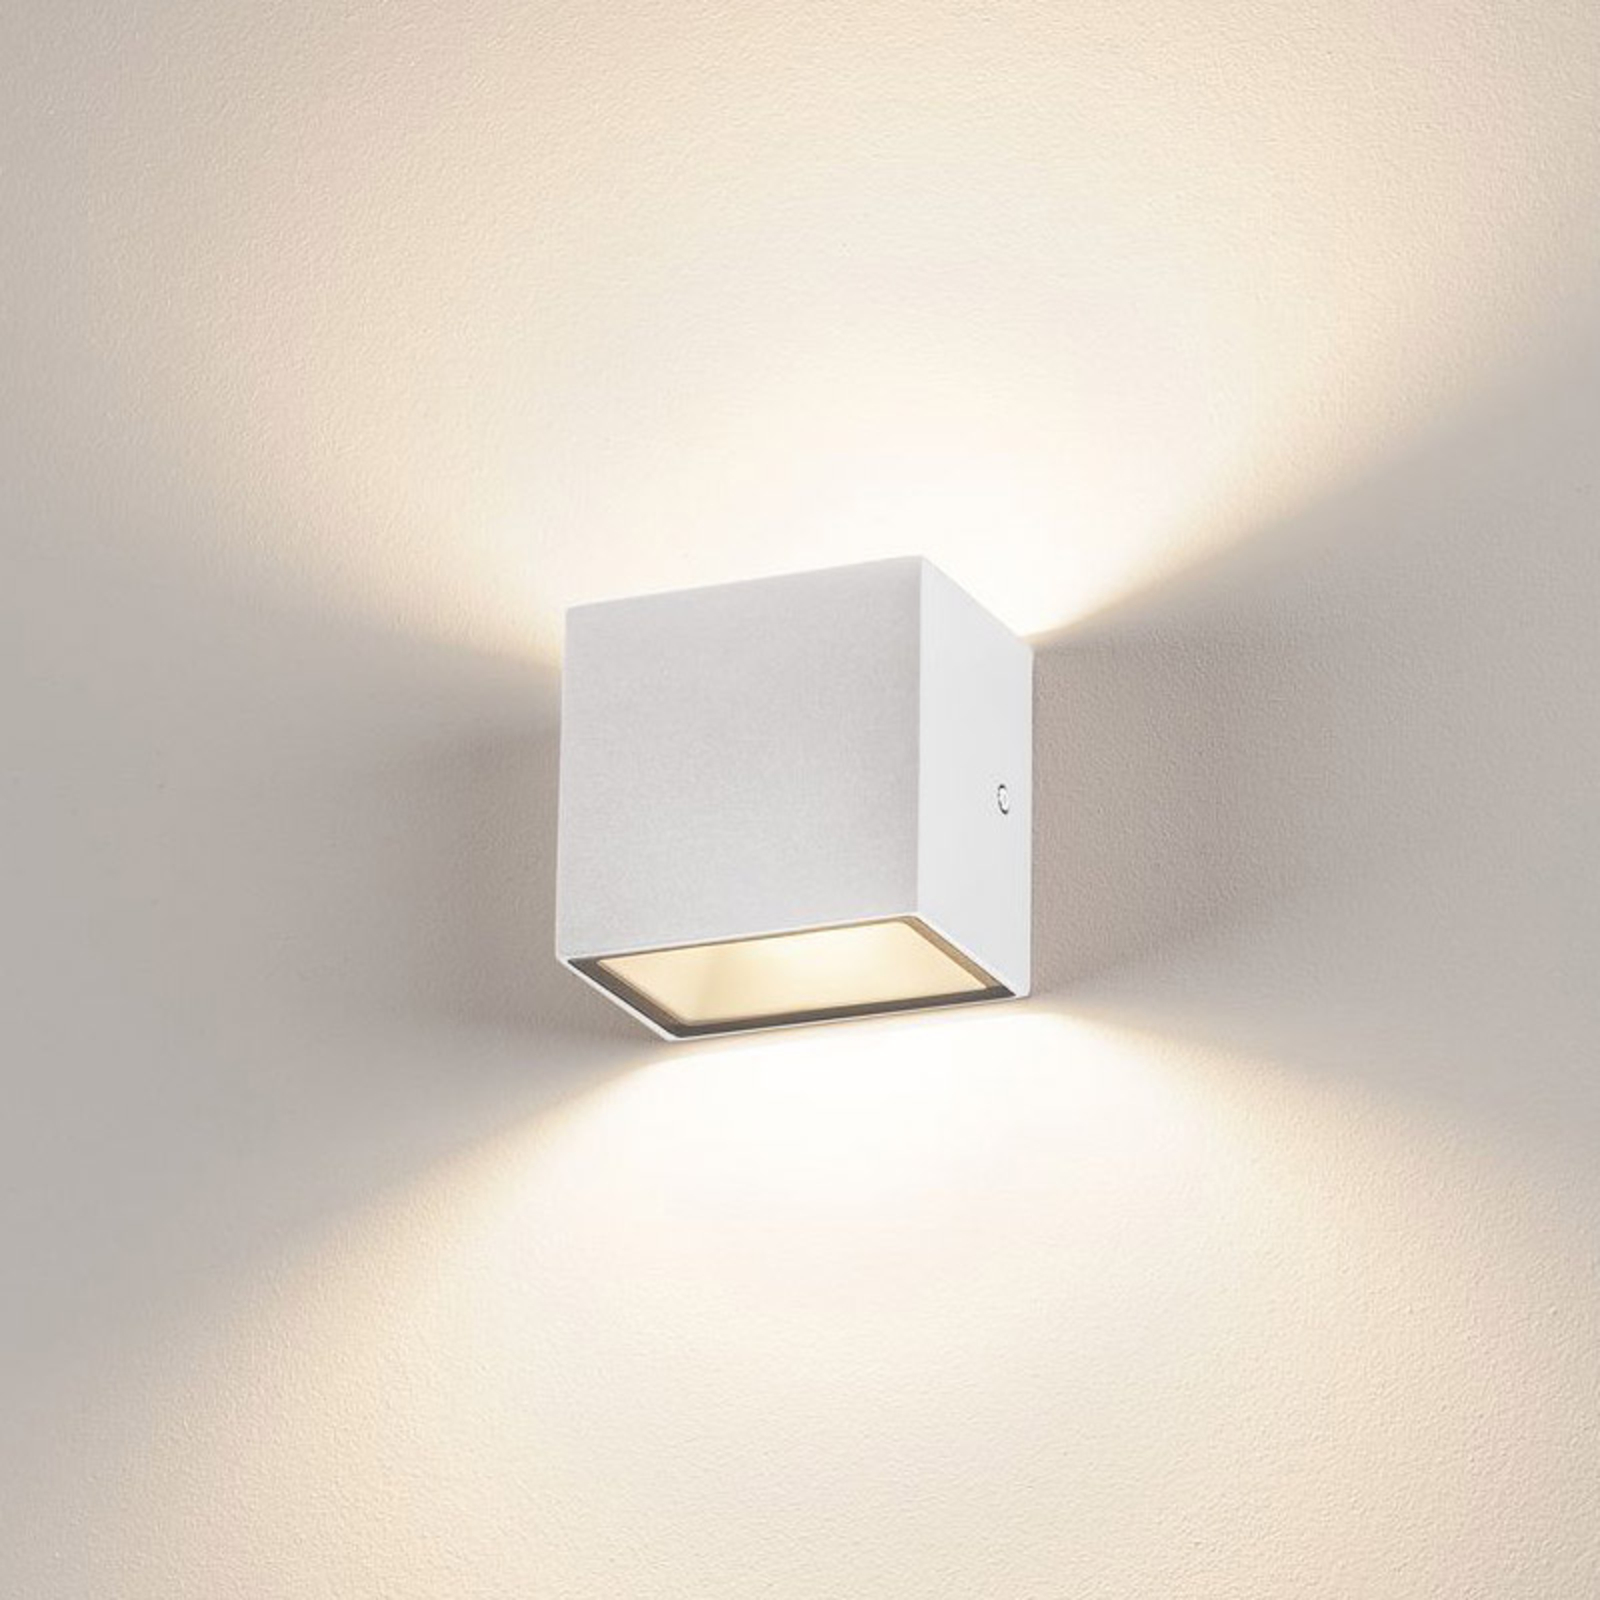 SLV Sitra Cube LED outdoor wall lamp, white